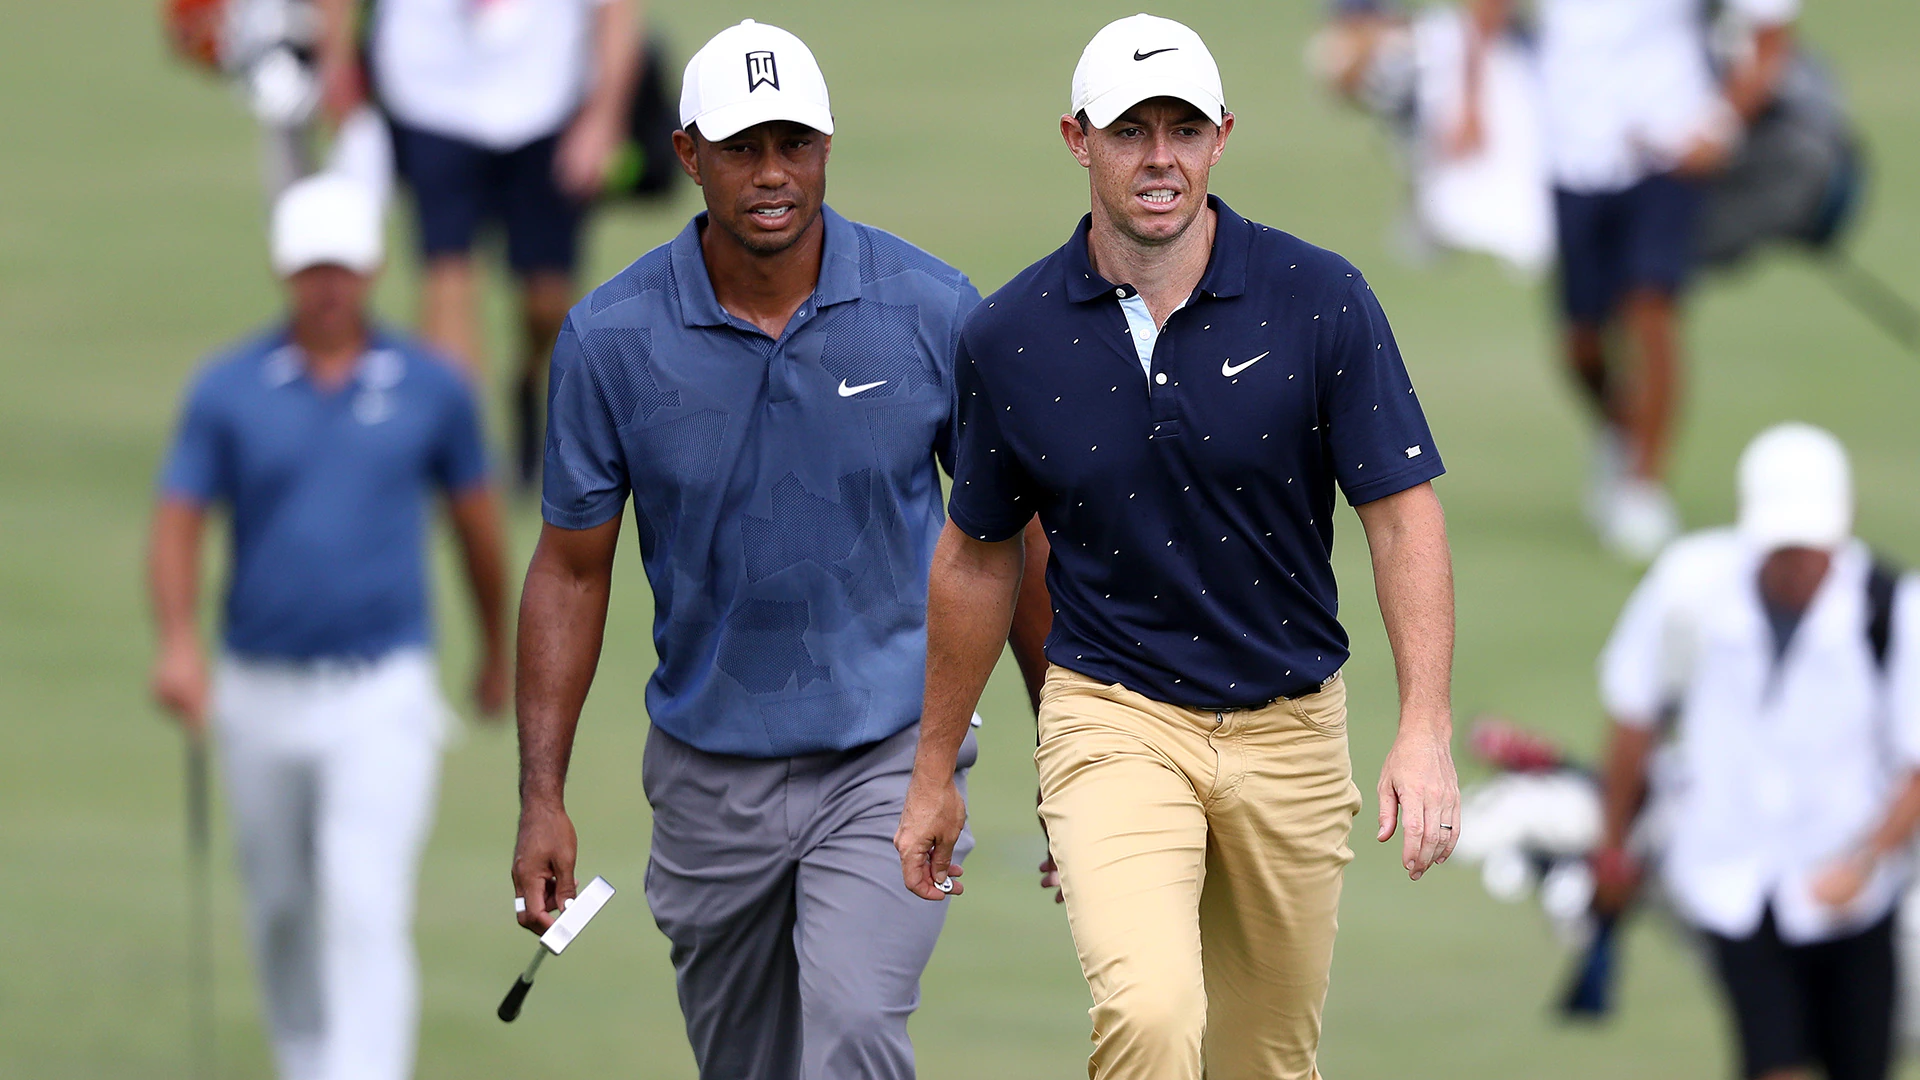 Rory McIlroy on potential Tiger Woods return: 'He likes to prove people wrong' 4